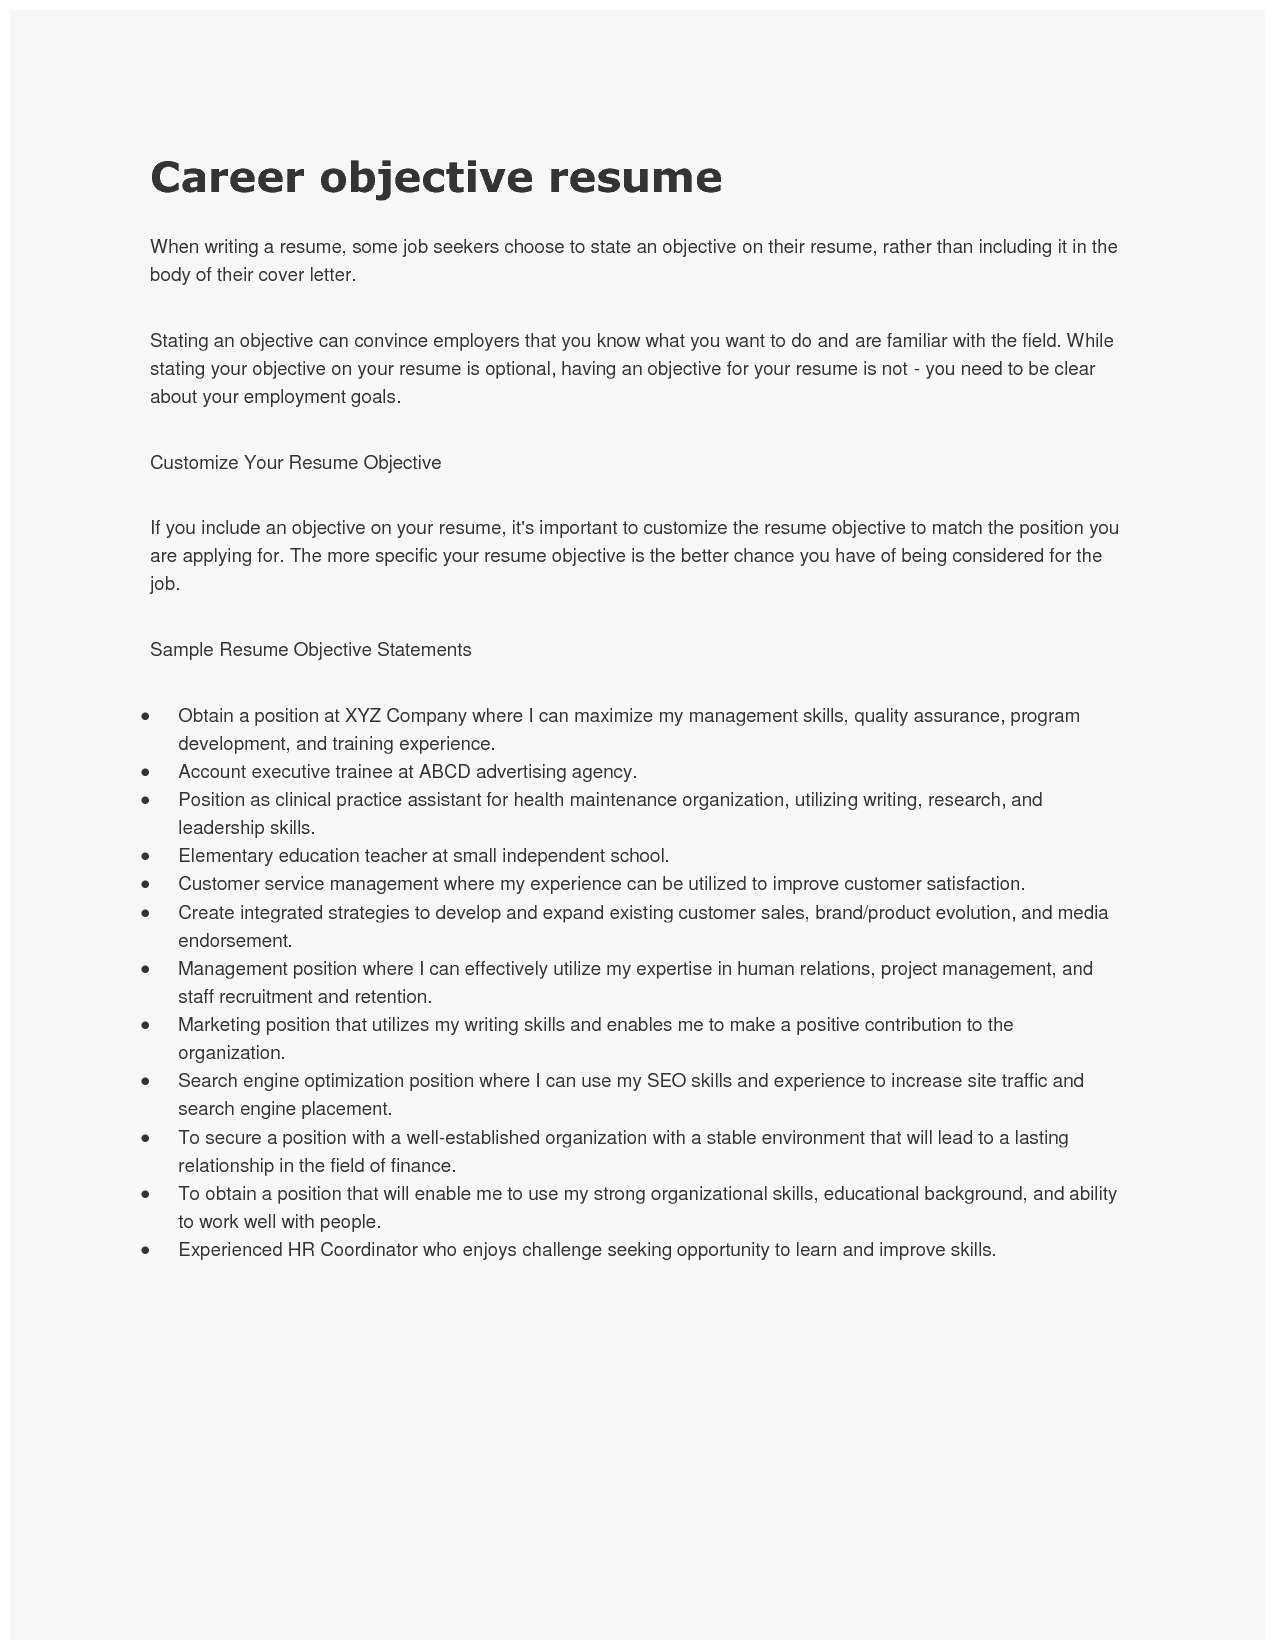 Objective On A Resume Good Objective Statement For Resume Best 12 General Career Objective Resume Samplebusinessresume Of Good Objective Statement For Resume objective on a resume|wikiresume.com